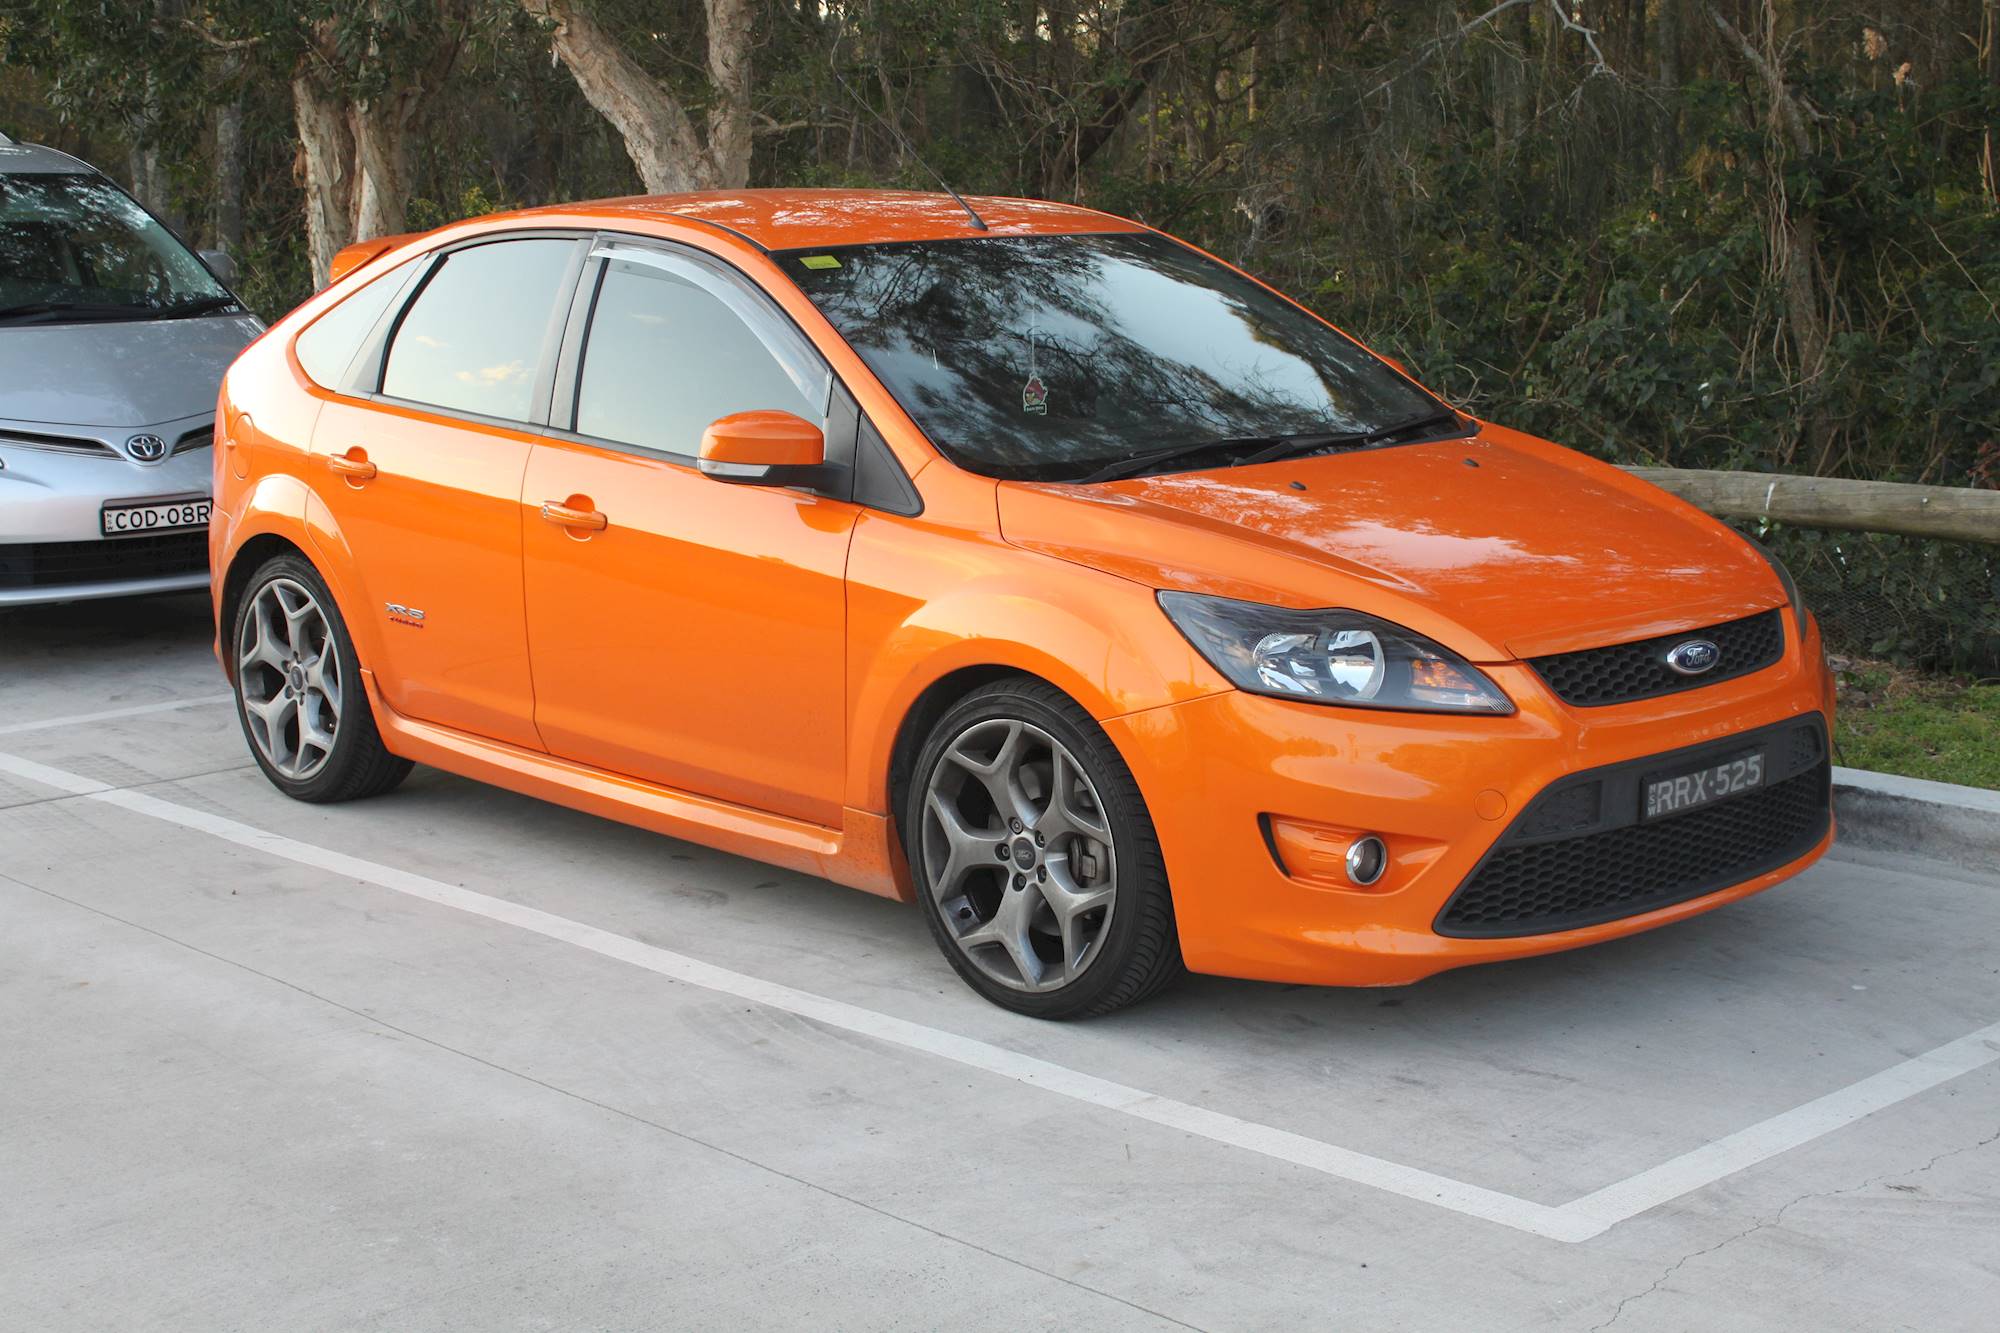 2010 Ford Focus SES - Coupe 2.0L Manual